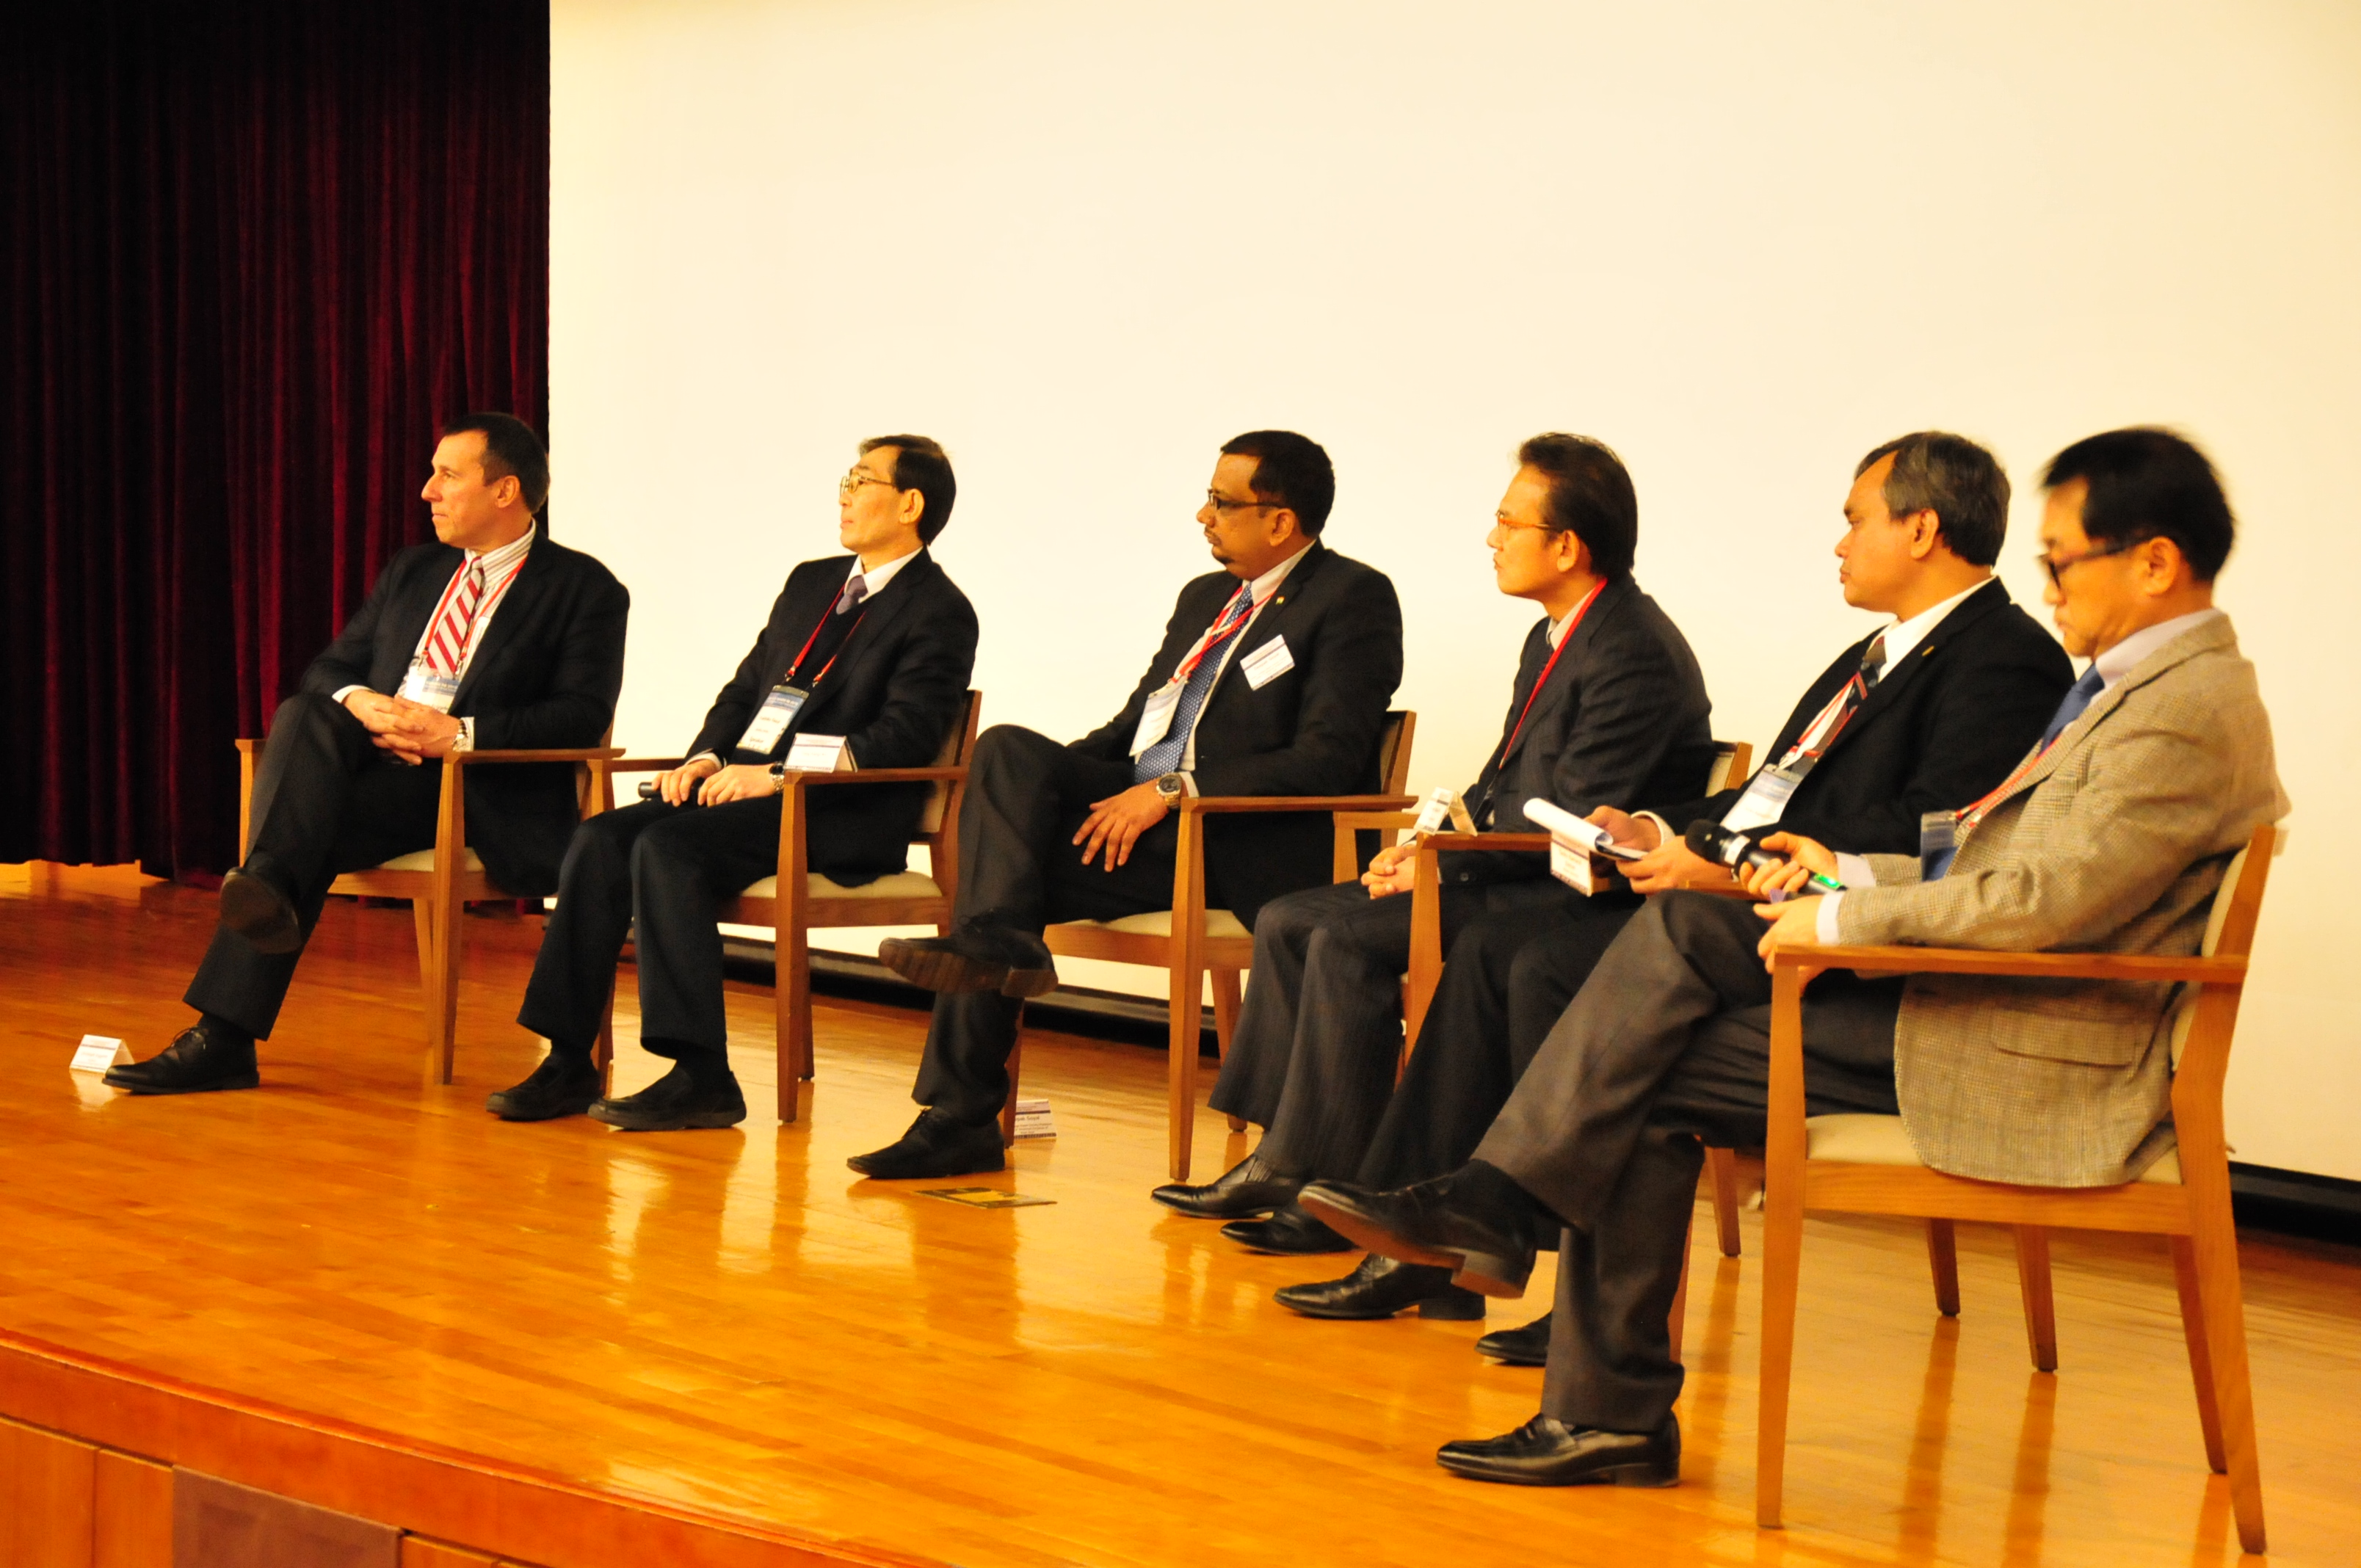 Panel Discussion on Future of Cartilage Repair in Asia